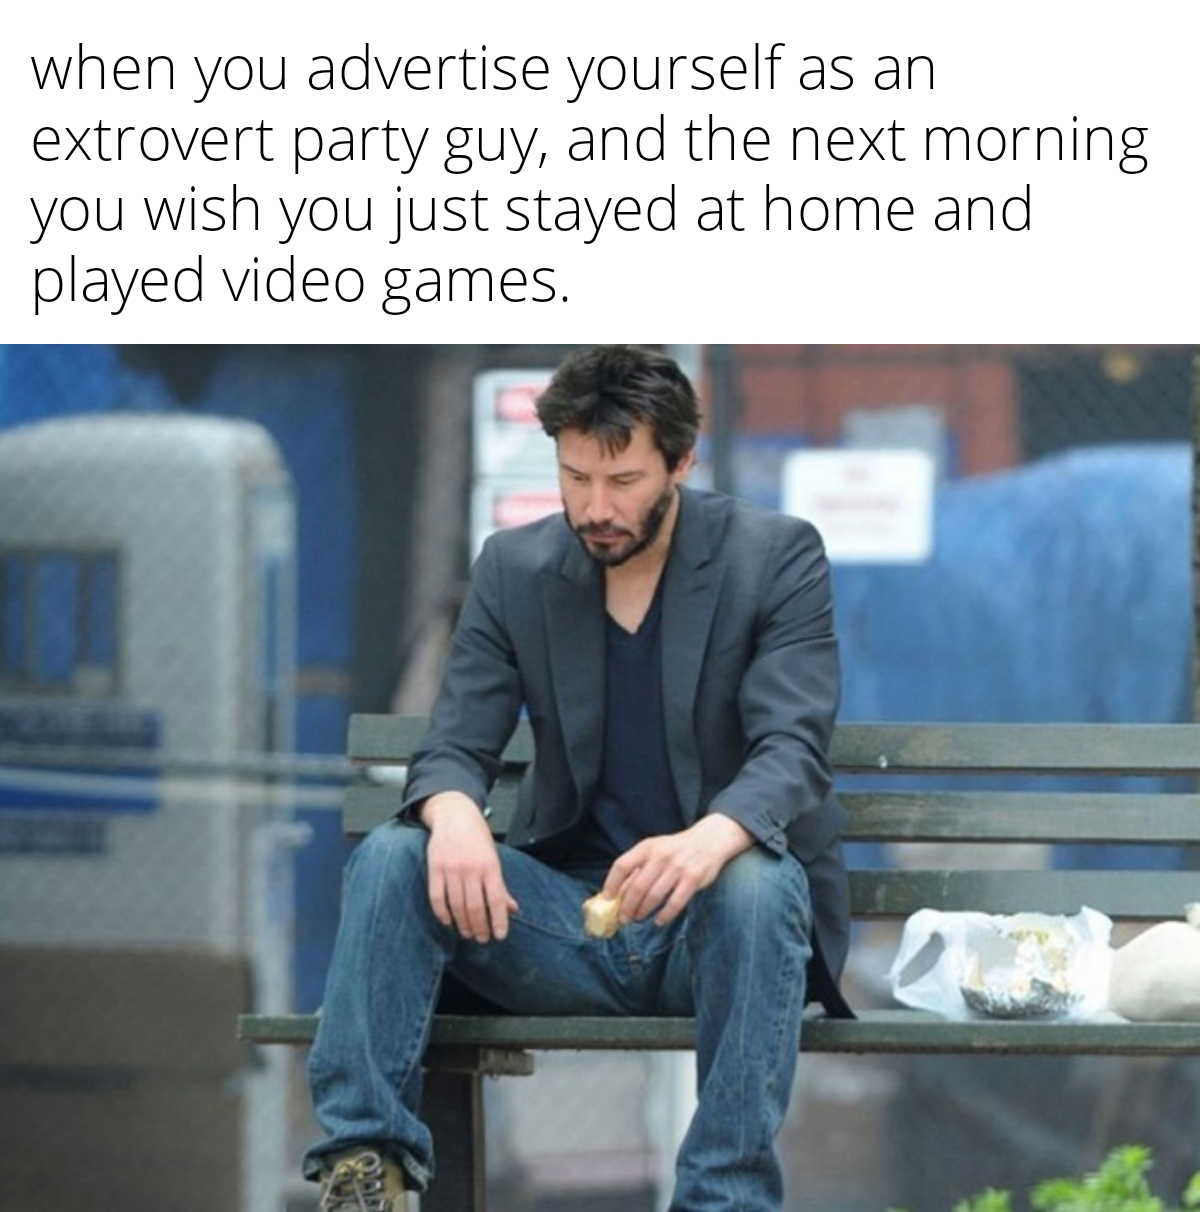 gaming memes - sad keanu reeves meme - when you advertise yourself as an extrovert party guy, and the next morning you wish you just stayed at home and played video games.